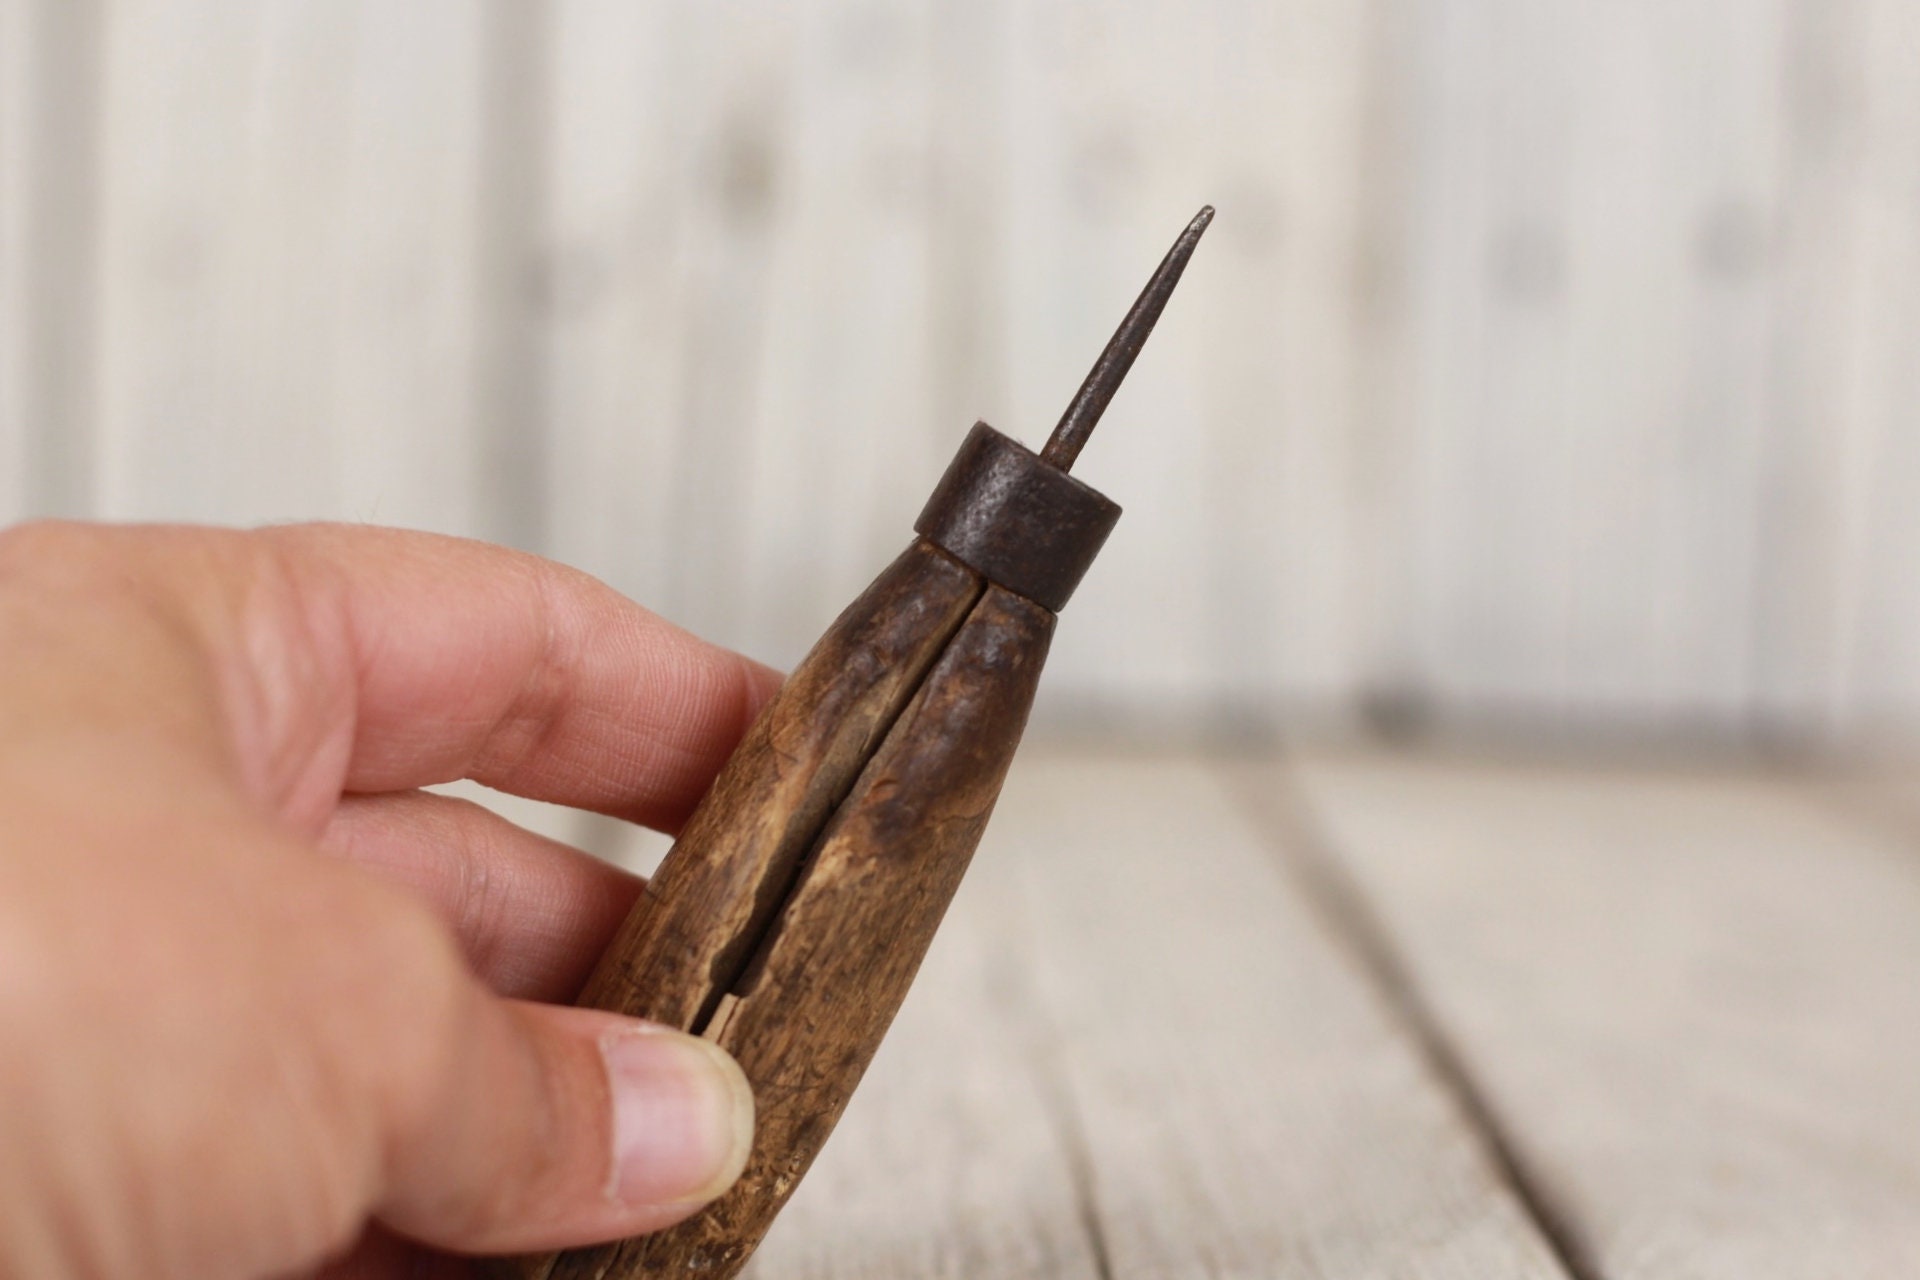 Awl w. Wooden Handle